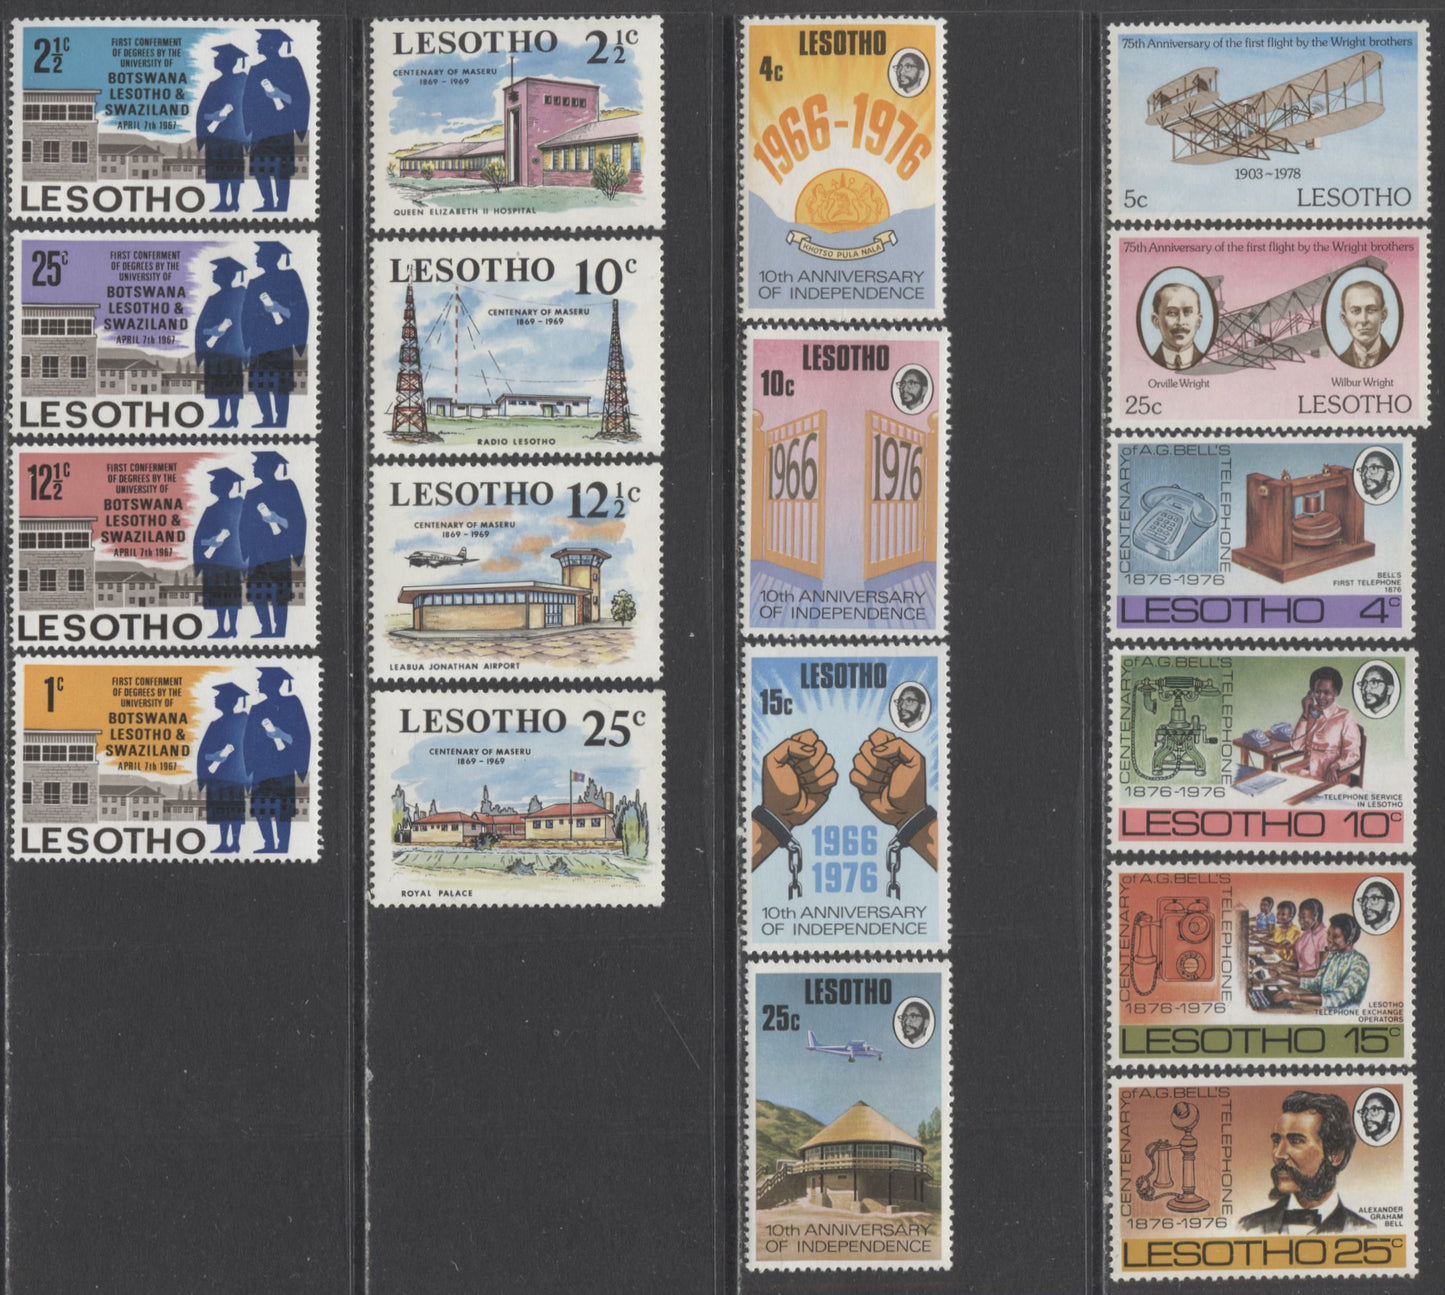 Lot 99 Lesotho SC#37/320 1967-1981 Commemoratives, A VFNH Range Of Singles, Souvenir Sheet & Strip Of 5, 2017 Scott Cat. $11.4 USD, Click on Listing to See ALL Pictures